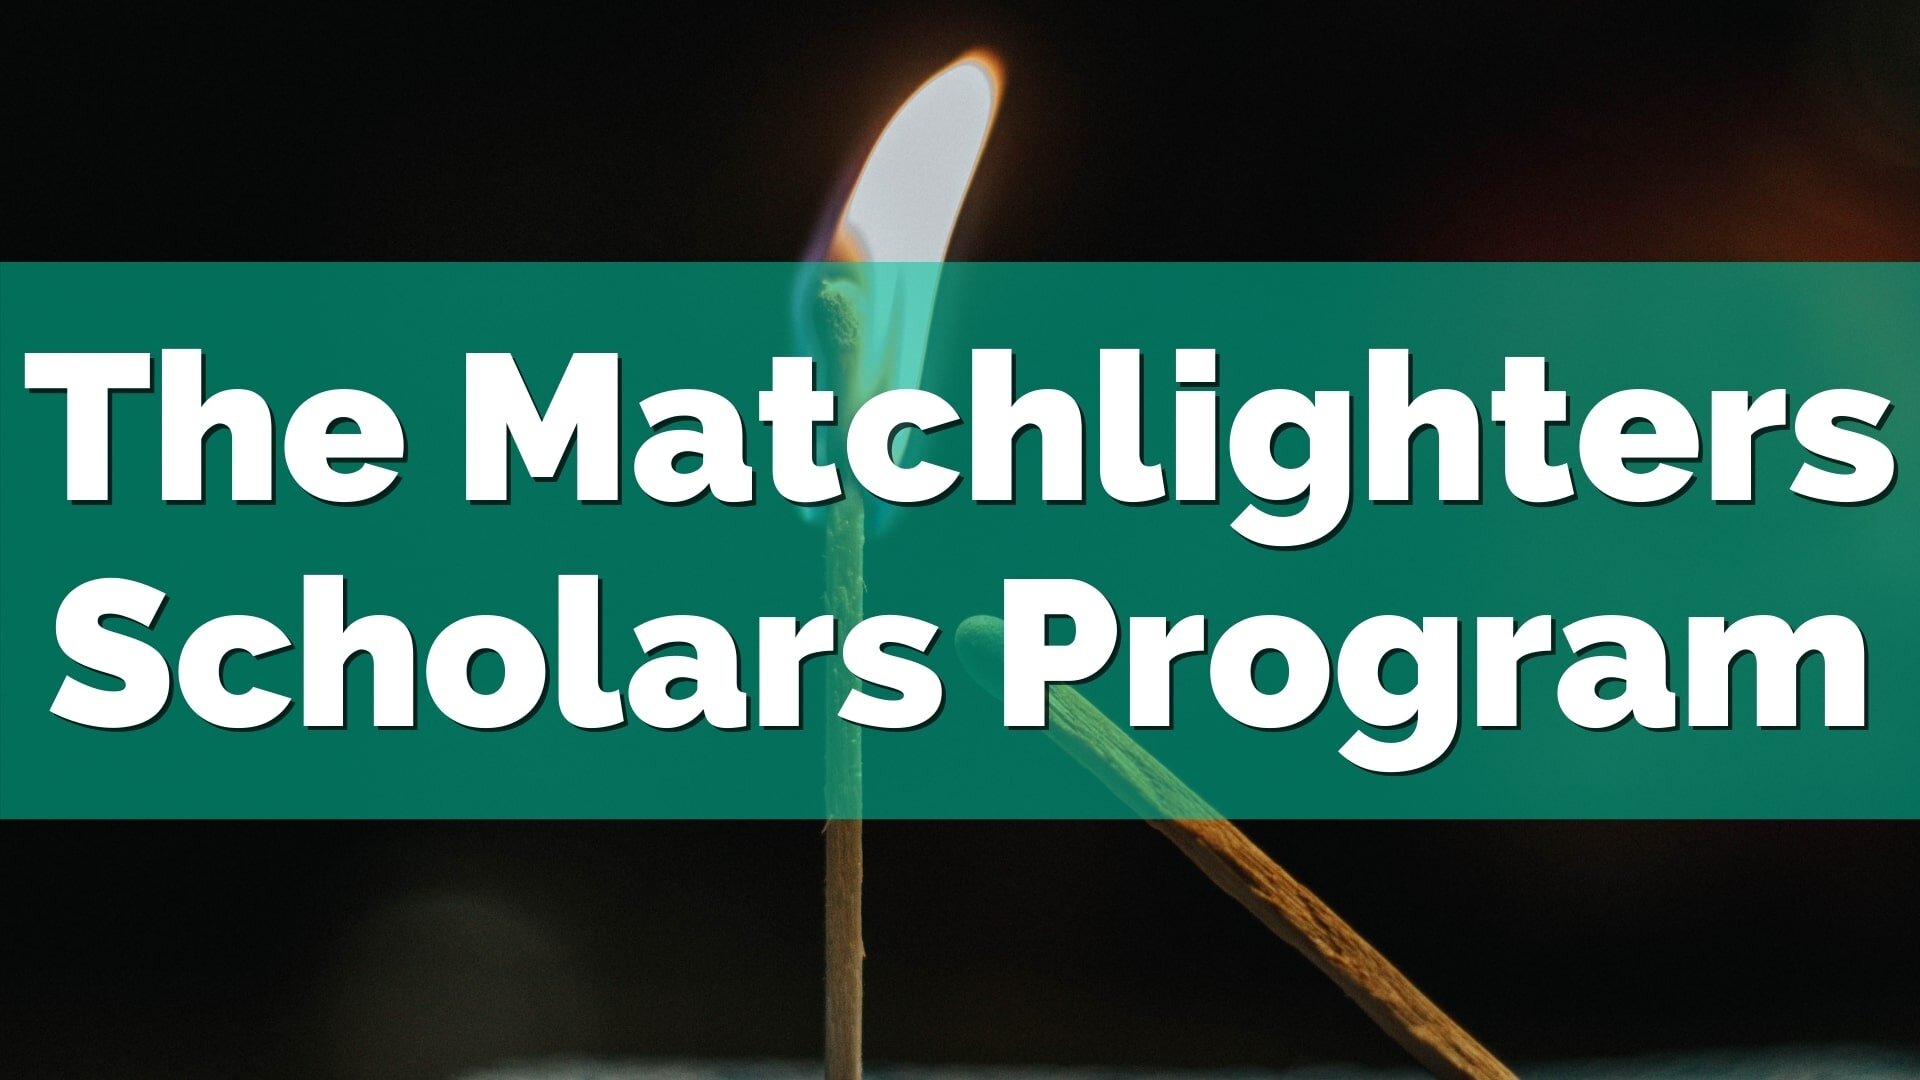 The Matchlighters Scholars Program: Free college essay and application coaching for students. Apply today!